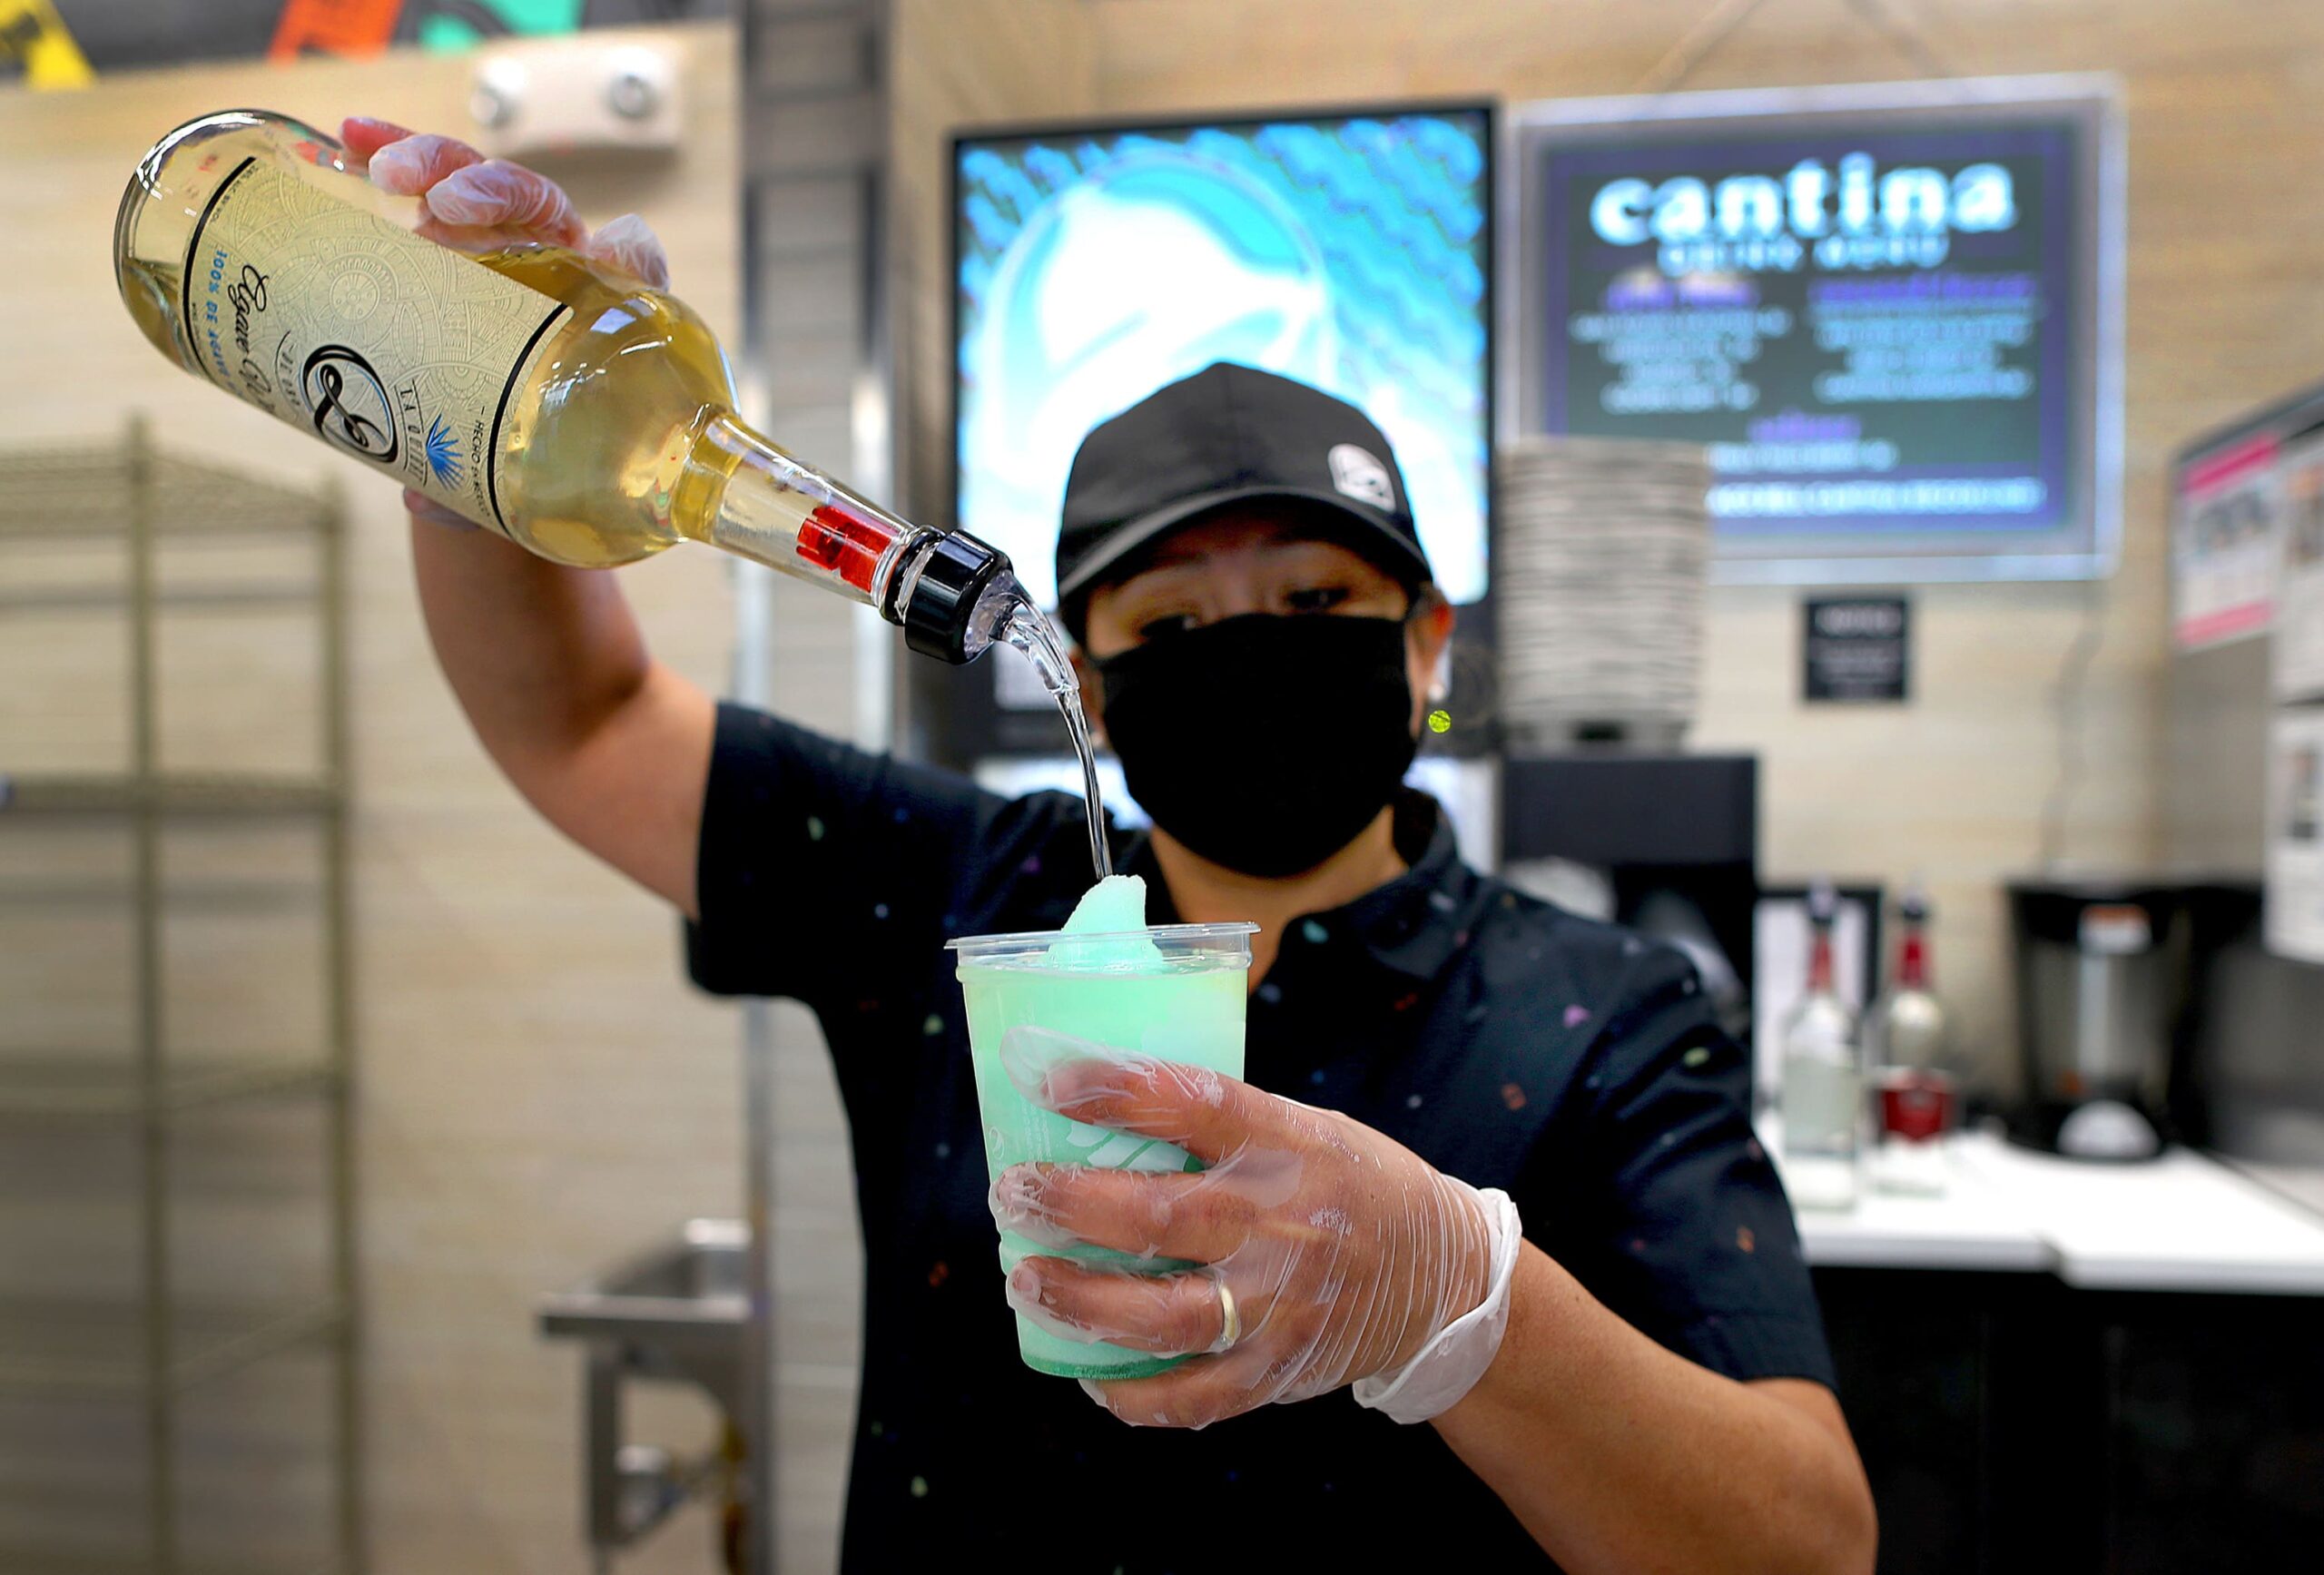 Tequila could overtake vodka as America’s top liquor as sales boom